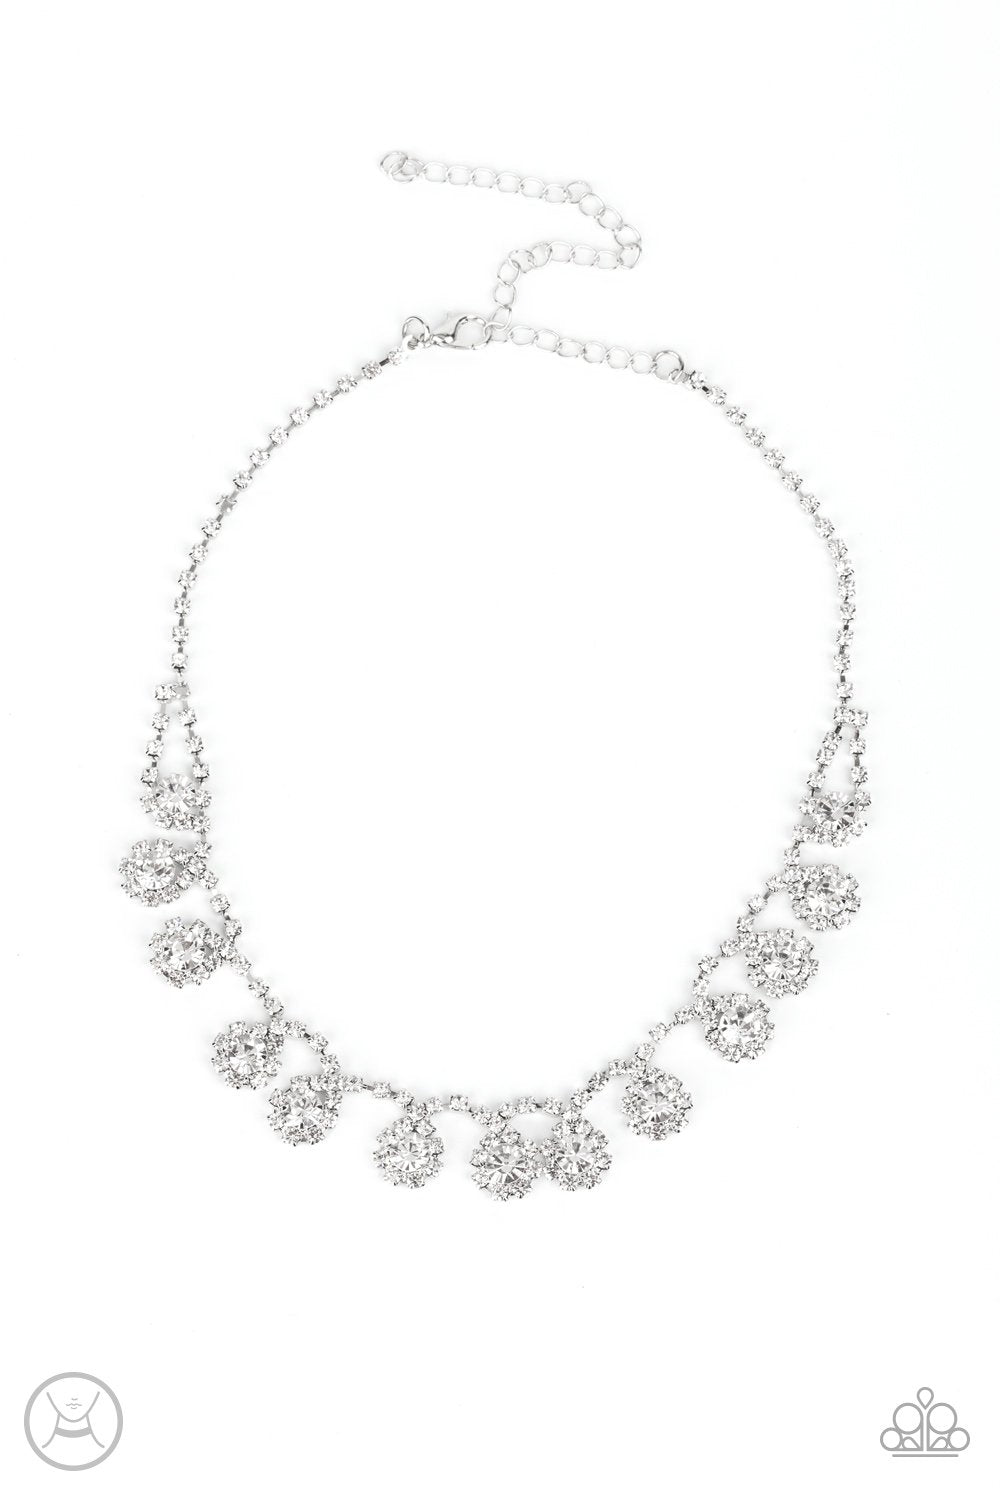 Princess Prominence White Rhinestone Necklace - Paparazzi Accessories Life of the Party Exclusive November 2021 - lightbox -CarasShop.com - $5 Jewelry by Cara Jewels